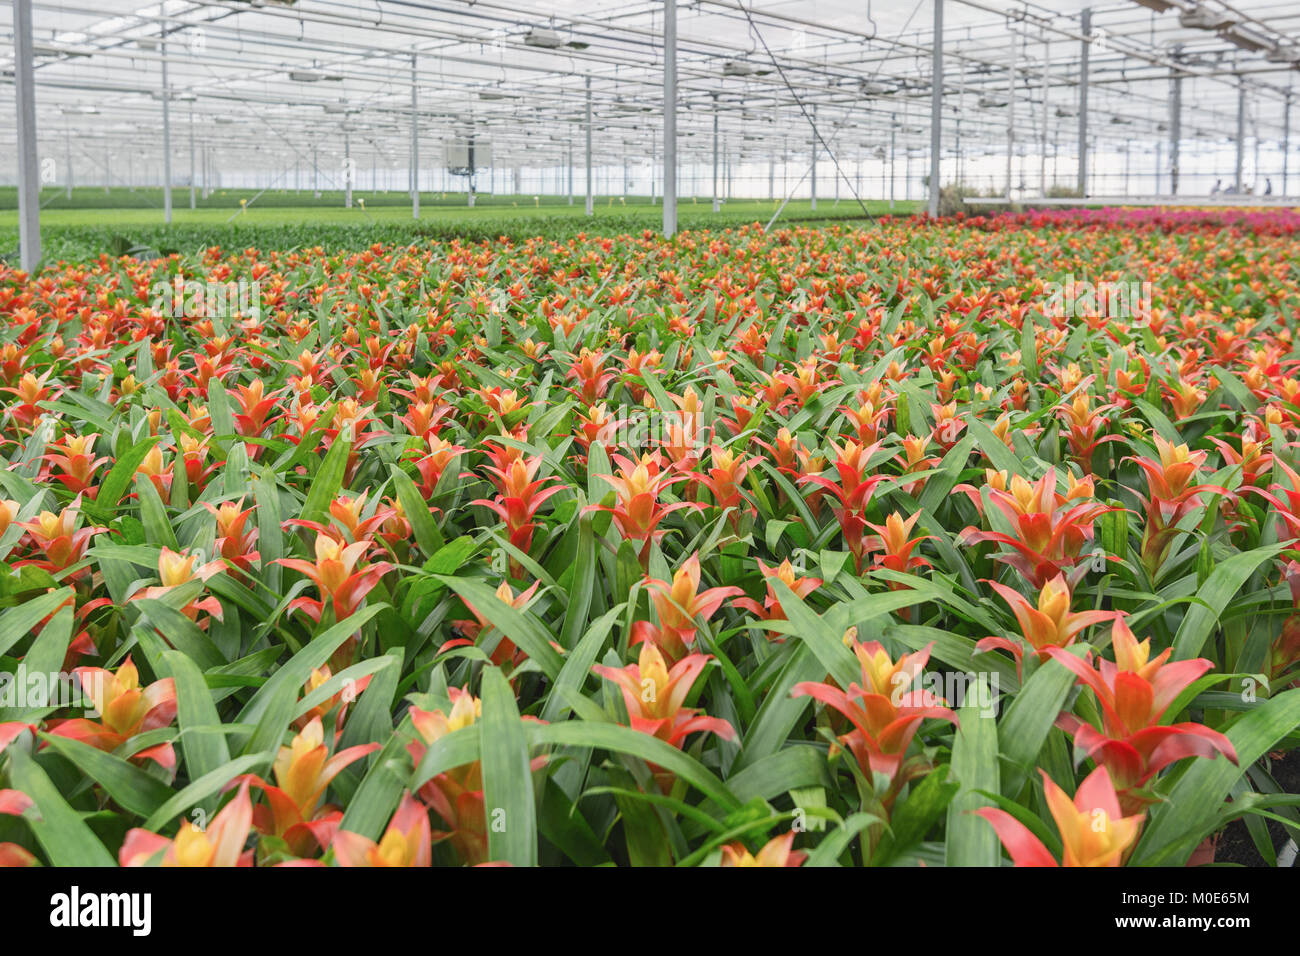 Growing bromelias in a large greenhouse in the Netherlands Stock Photo